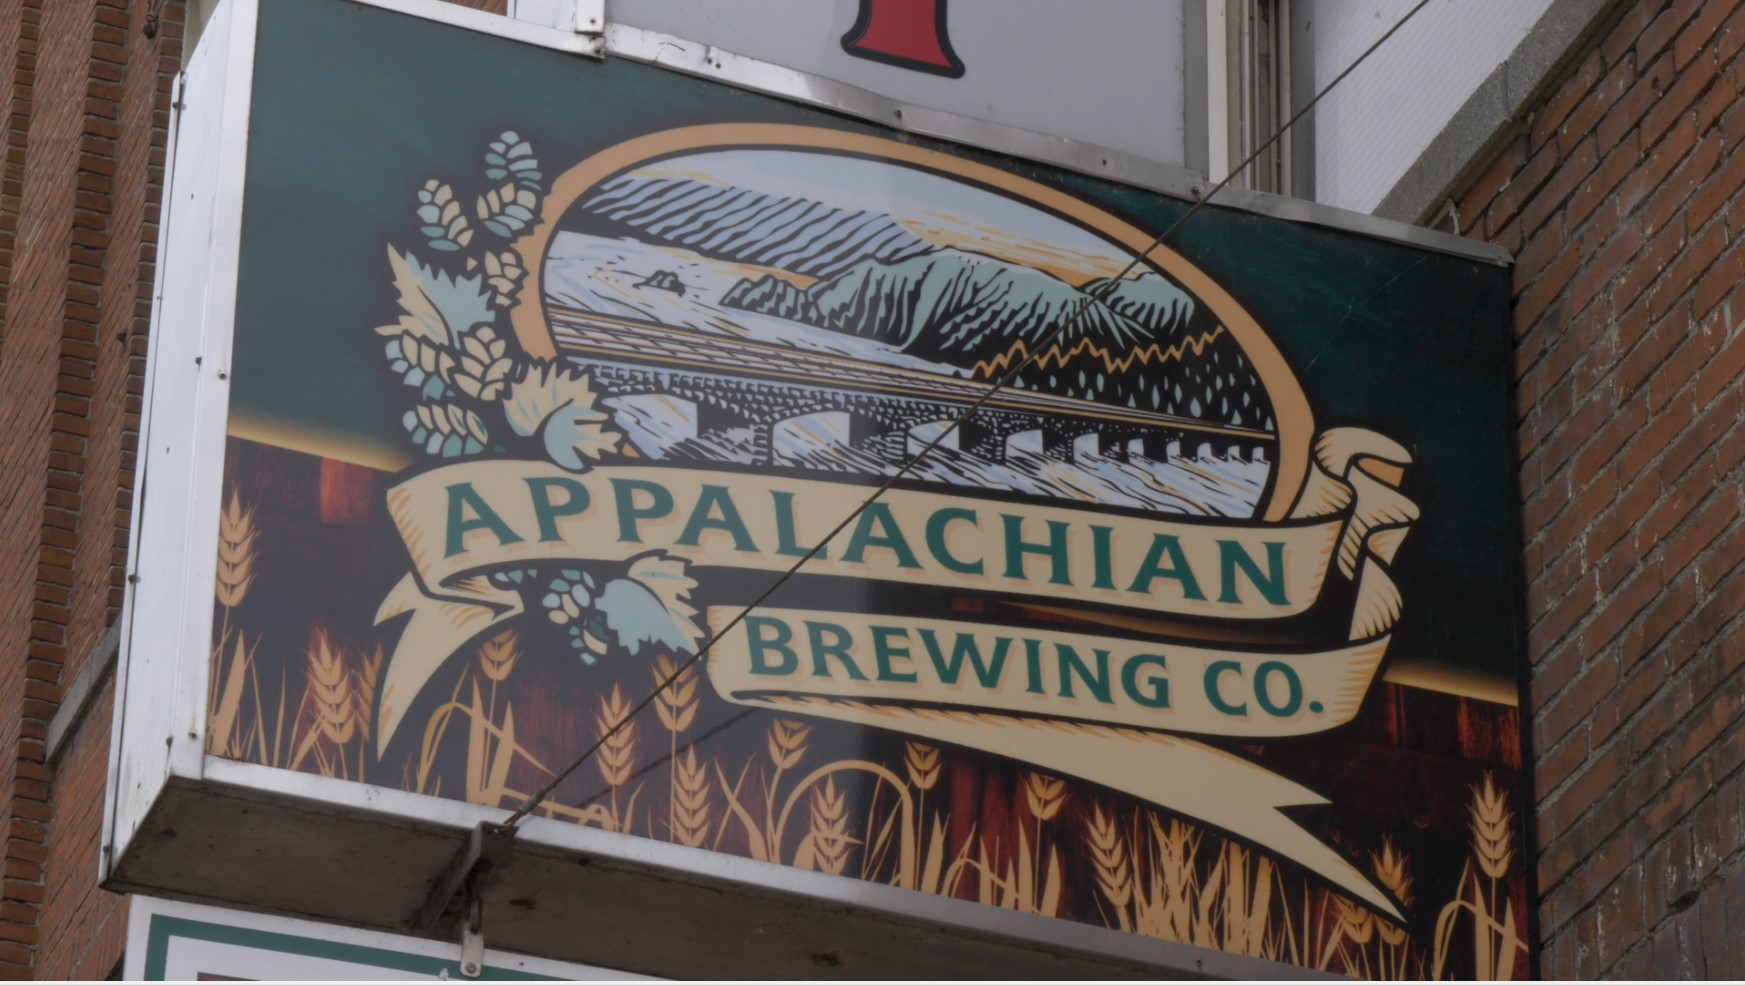 Music is back at The Abbey Bar at Appalachian Brewing Company